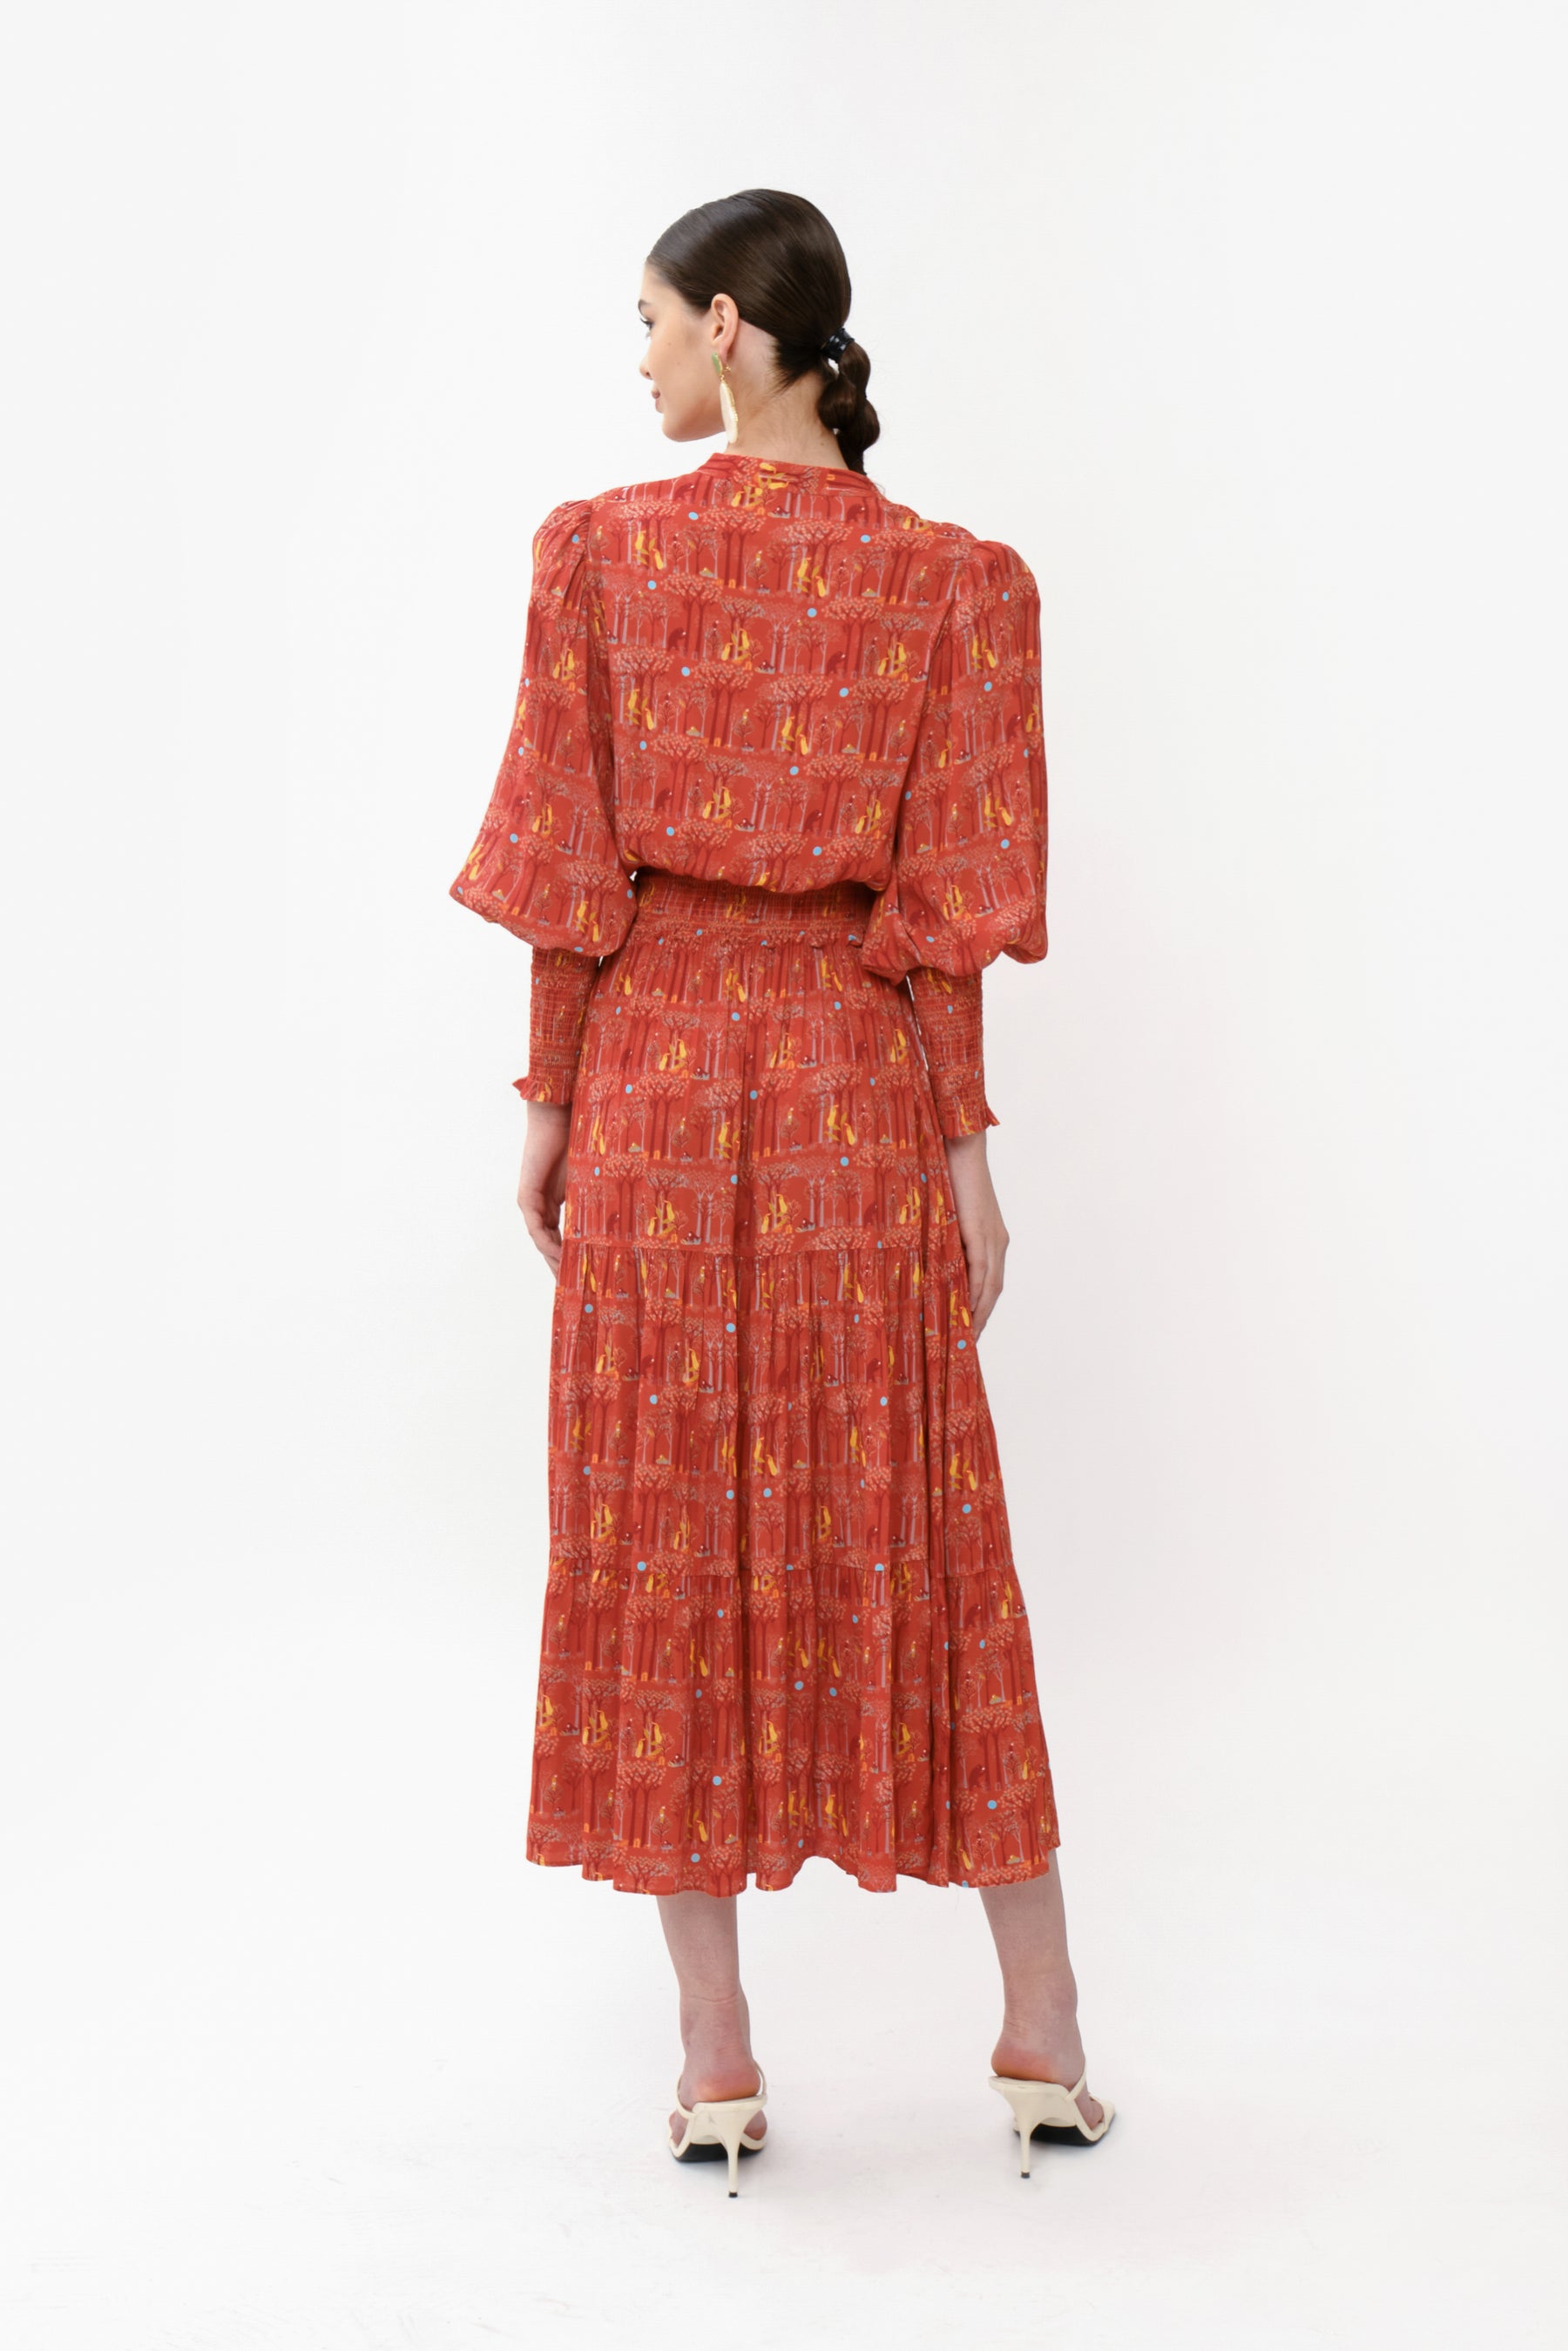 GINA Dress in Red Forest